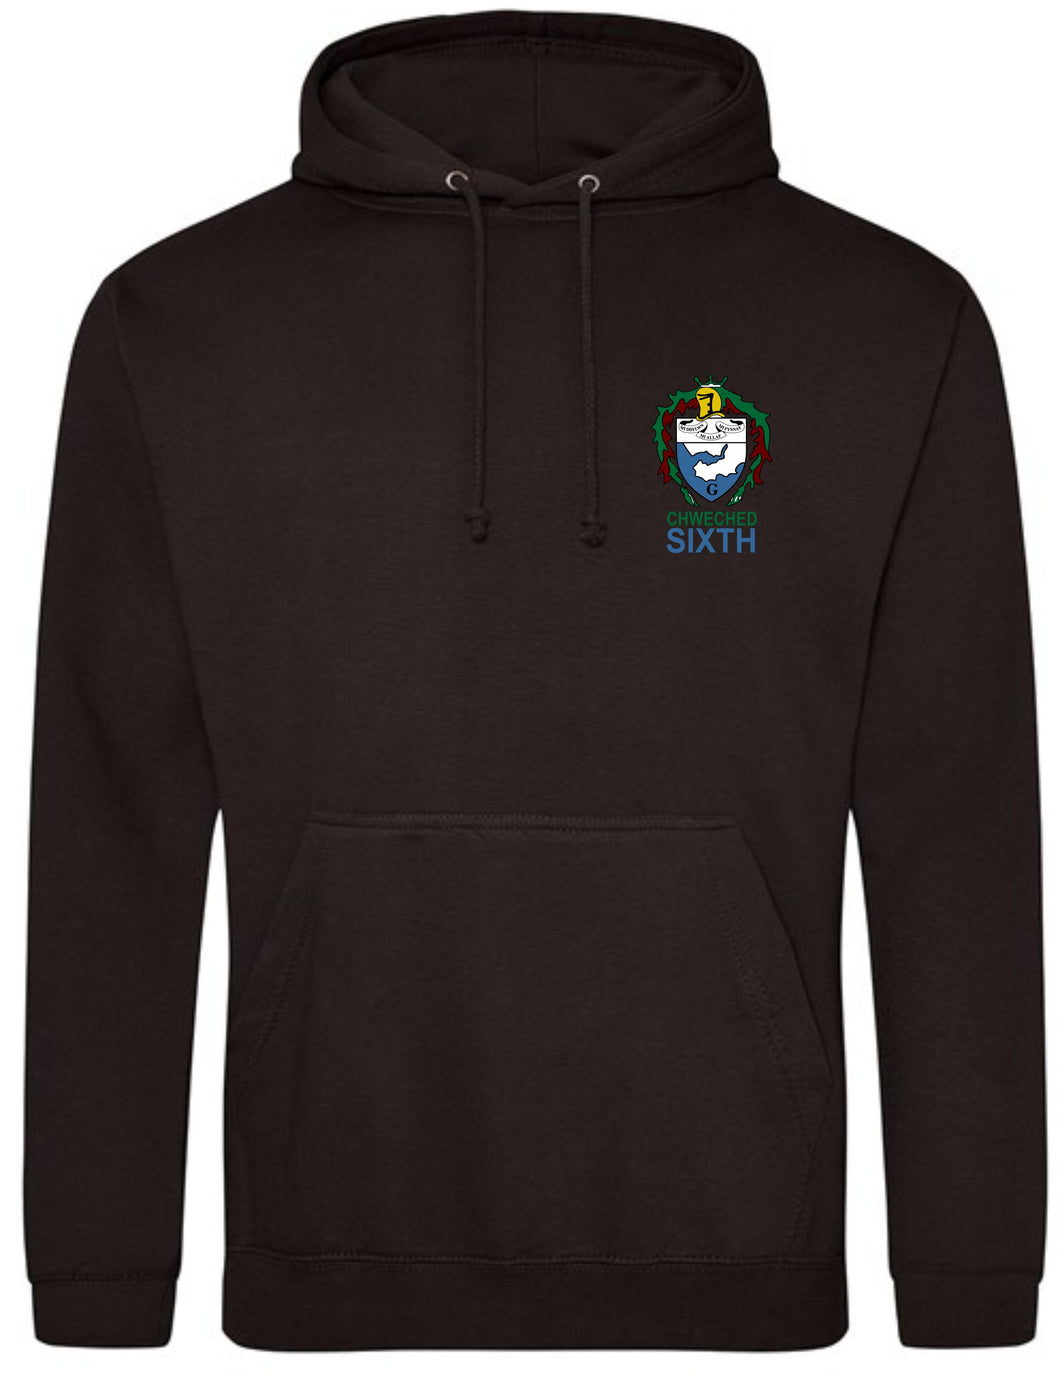 Gowerton 6th Form Hood (NON REFUNDABLE ITEM)